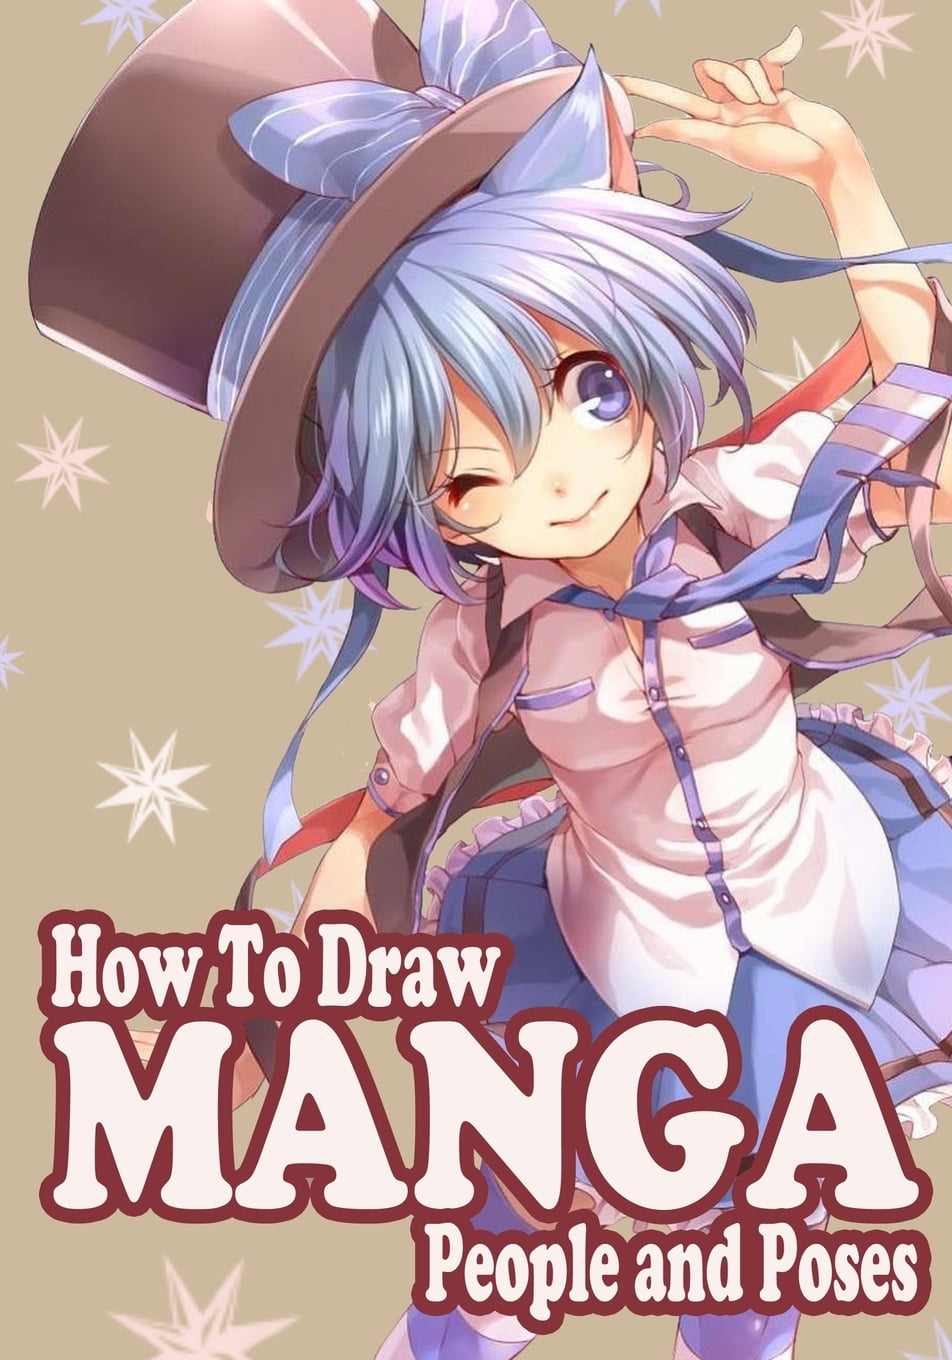 How to Draw an Anime Girl - Easy Drawing Art